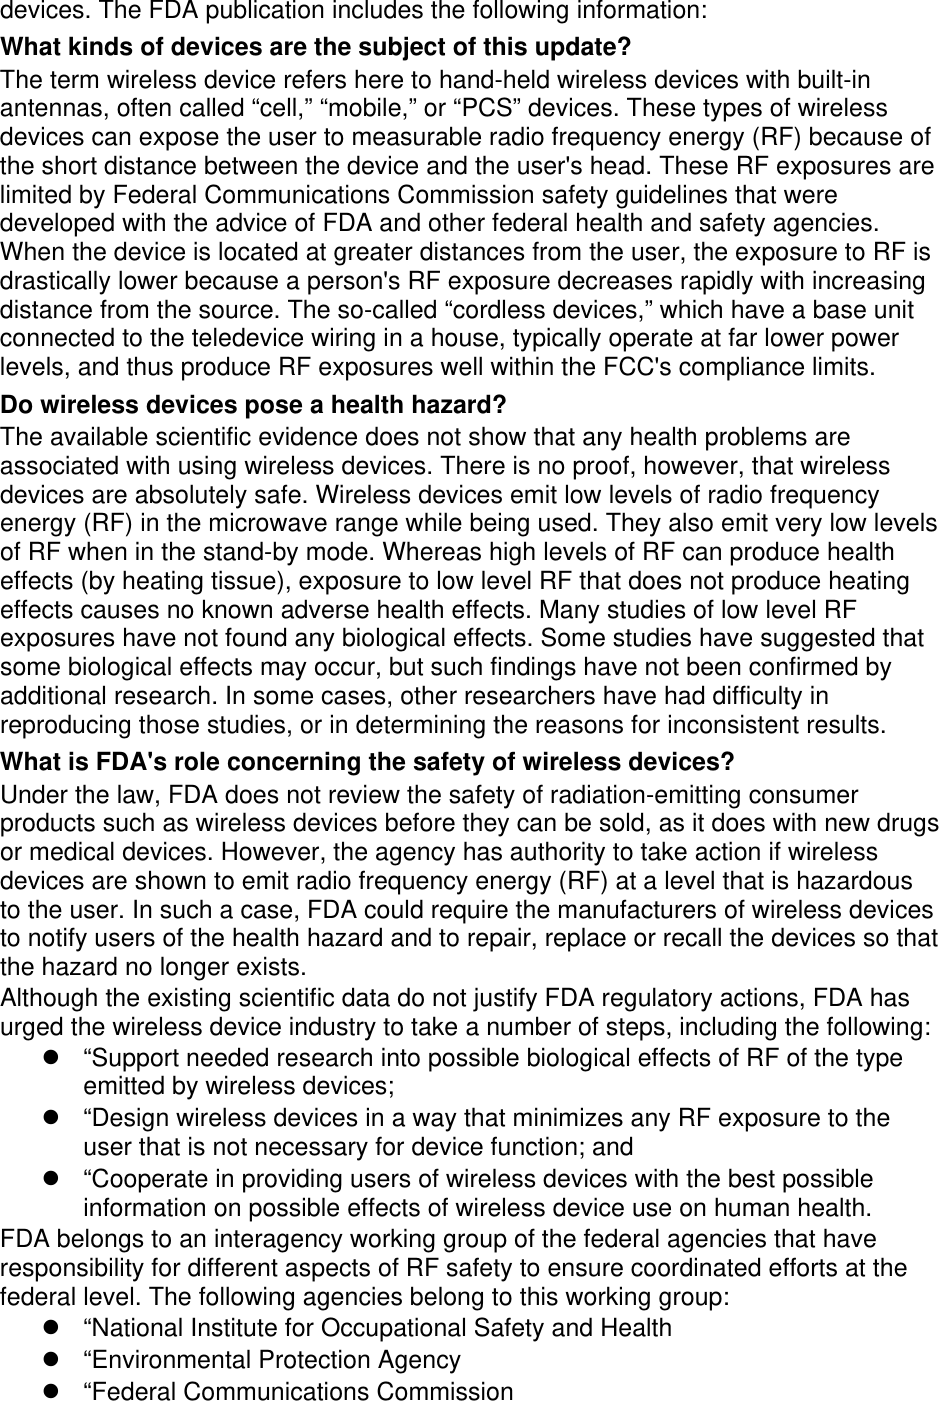 devices. The FDA publication includes the following information: What kinds of devices are the subject of this update? The term wireless device refers here to hand-held wireless devices with built-in antennas, often called “cell,” “mobile,” or “PCS” devices. These types of wireless devices can expose the user to measurable radio frequency energy (RF) because of the short distance between the device and the user&apos;s head. These RF exposures are limited by Federal Communications Commission safety guidelines that were developed with the advice of FDA and other federal health and safety agencies. When the device is located at greater distances from the user, the exposure to RF is drastically lower because a person&apos;s RF exposure decreases rapidly with increasing distance from the source. The so-called “cordless devices,” which have a base unit connected to the teledevice wiring in a house, typically operate at far lower power levels, and thus produce RF exposures well within the FCC&apos;s compliance limits. Do wireless devices pose a health hazard? The available scientific evidence does not show that any health problems are associated with using wireless devices. There is no proof, however, that wireless devices are absolutely safe. Wireless devices emit low levels of radio frequency energy (RF) in the microwave range while being used. They also emit very low levels of RF when in the stand-by mode. Whereas high levels of RF can produce health effects (by heating tissue), exposure to low level RF that does not produce heating effects causes no known adverse health effects. Many studies of low level RF exposures have not found any biological effects. Some studies have suggested that some biological effects may occur, but such findings have not been confirmed by additional research. In some cases, other researchers have had difficulty in reproducing those studies, or in determining the reasons for inconsistent results. What is FDA&apos;s role concerning the safety of wireless devices? Under the law, FDA does not review the safety of radiation-emitting consumer products such as wireless devices before they can be sold, as it does with new drugs or medical devices. However, the agency has authority to take action if wireless devices are shown to emit radio frequency energy (RF) at a level that is hazardous to the user. In such a case, FDA could require the manufacturers of wireless devices to notify users of the health hazard and to repair, replace or recall the devices so that the hazard no longer exists. Although the existing scientific data do not justify FDA regulatory actions, FDA has urged the wireless device industry to take a number of steps, including the following:   “Support needed research into possible biological effects of RF of the type emitted by wireless devices;   “Design wireless devices in a way that minimizes any RF exposure to the user that is not necessary for device function; and   “Cooperate in providing users of wireless devices with the best possible information on possible effects of wireless device use on human health. FDA belongs to an interagency working group of the federal agencies that have responsibility for different aspects of RF safety to ensure coordinated efforts at the federal level. The following agencies belong to this working group:   “National Institute for Occupational Safety and Health   “Environmental Protection Agency   “Federal Communications Commission 